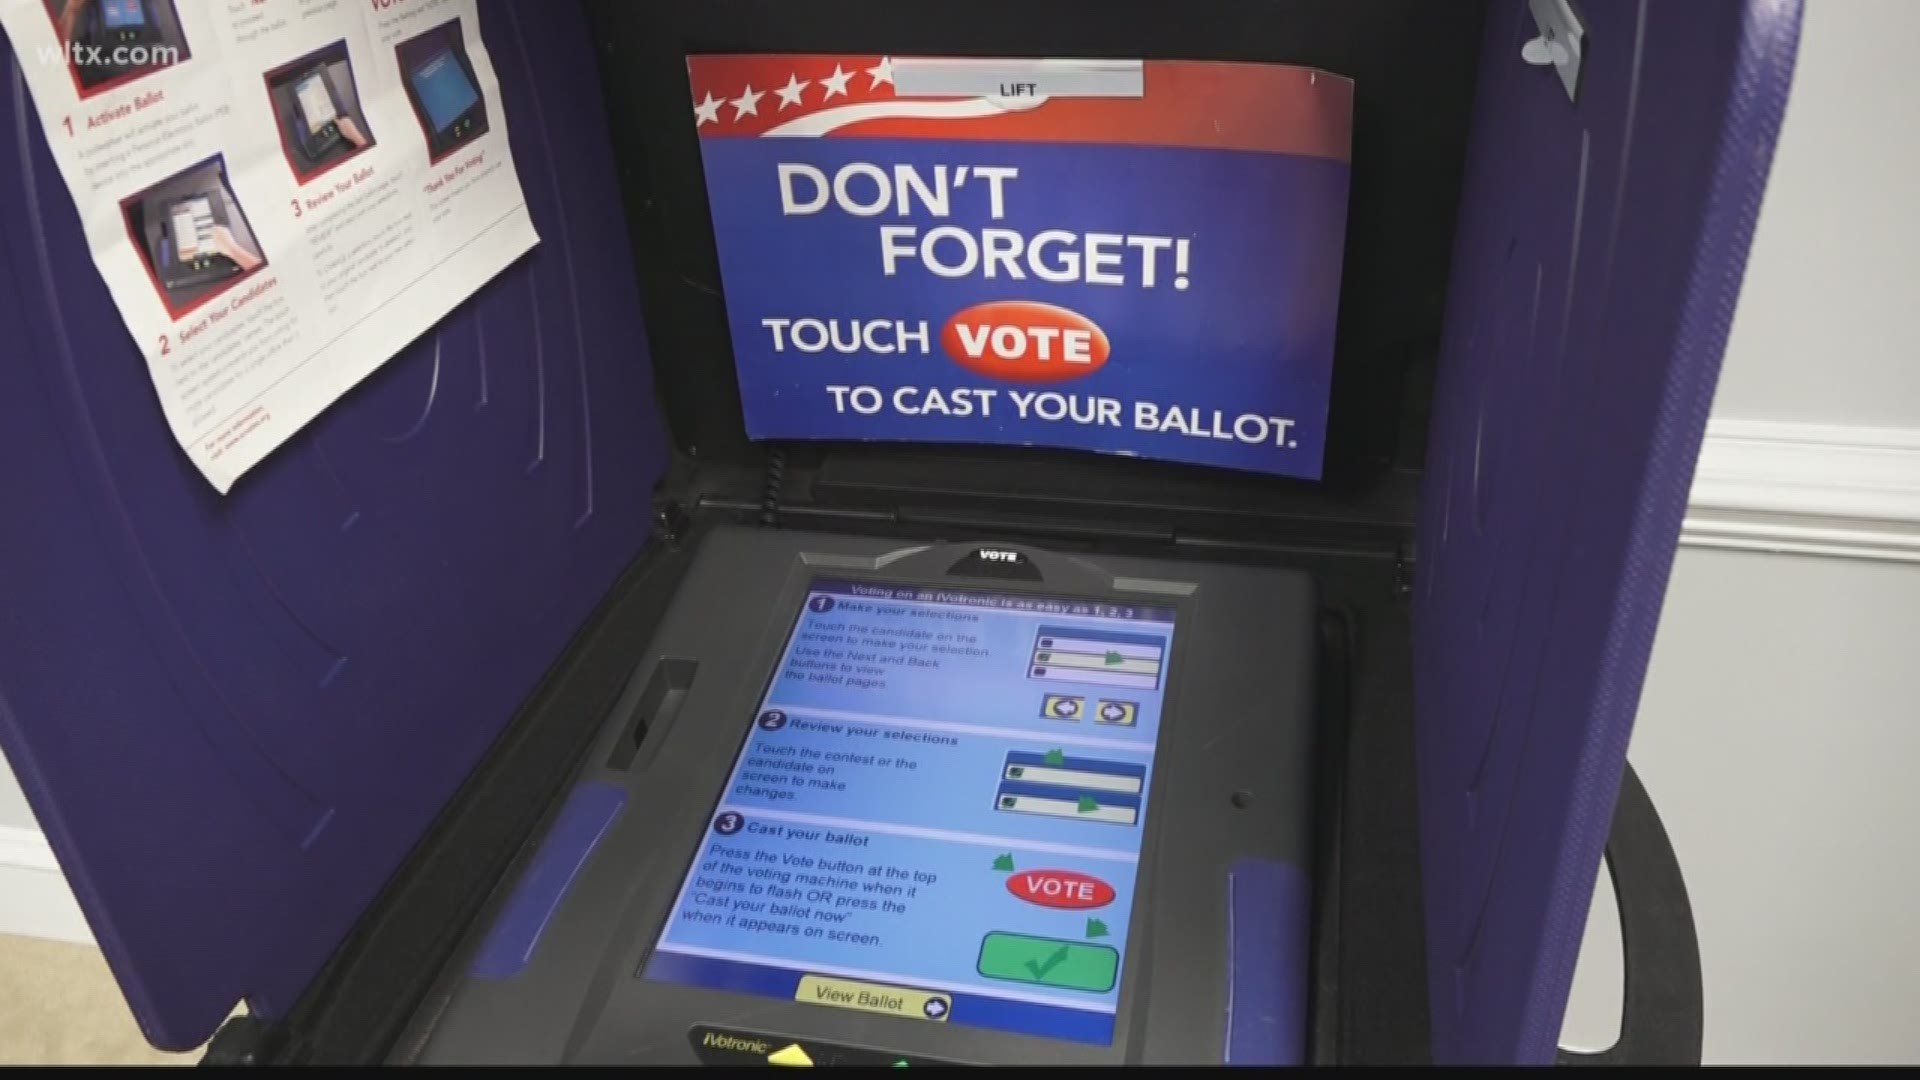 Earlier this week we told you about a software glitch Richland County had with its voting machines. Now the state election commission is pushing to replace every voting machine across the state.